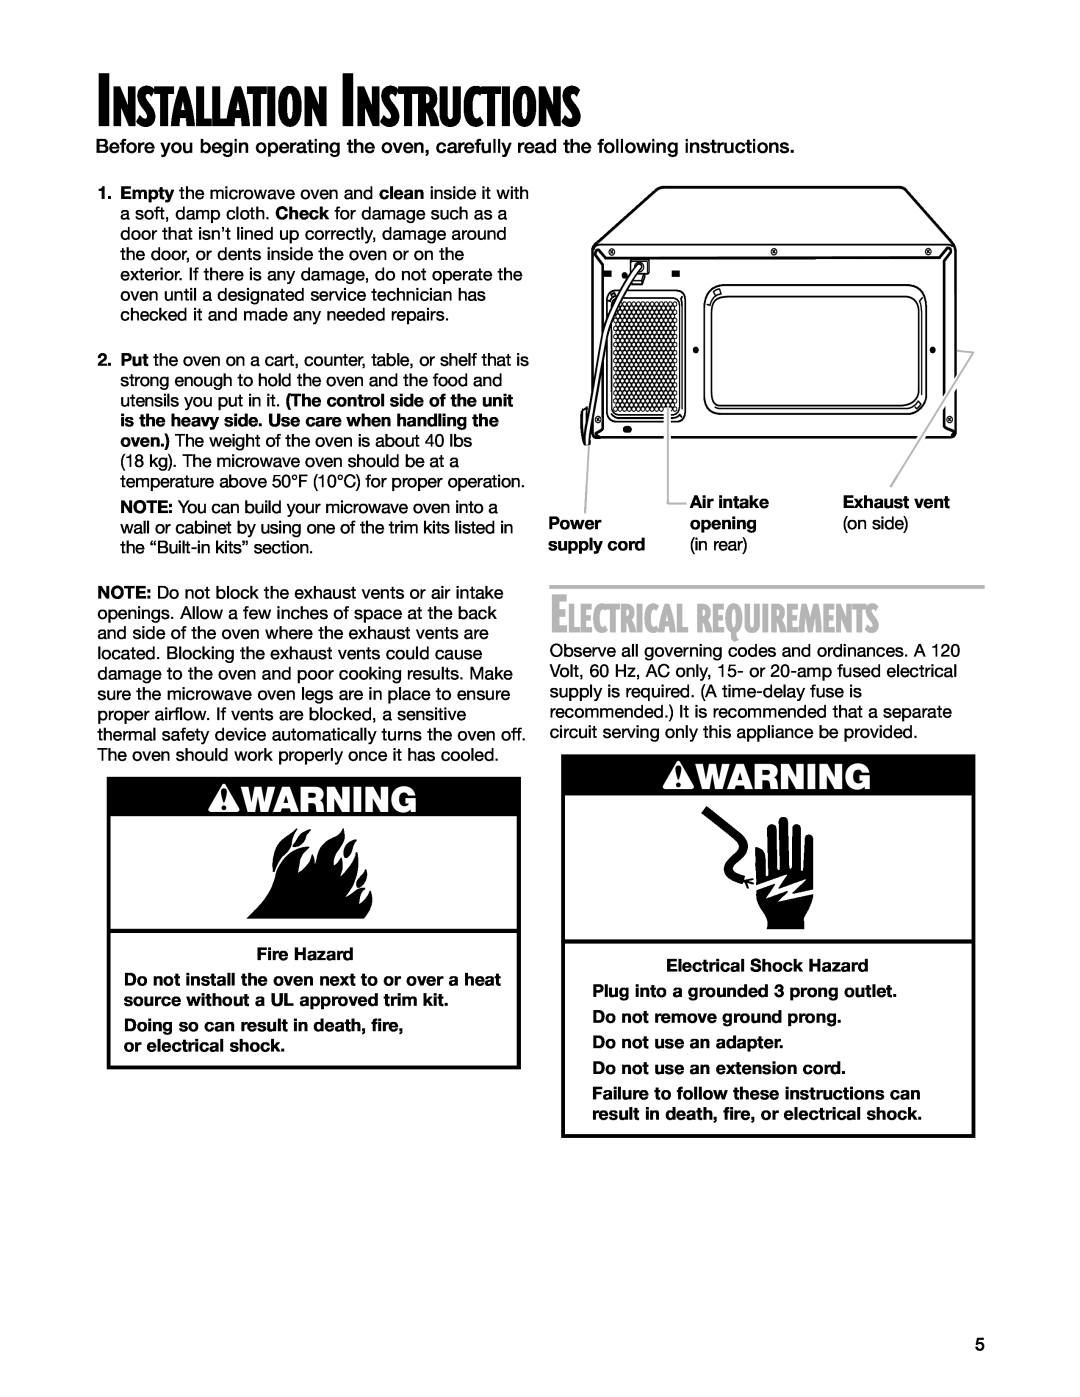 Whirlpool MT3185SH installation instructions wWARNING, Electrical Requirements, Installation Instructions 